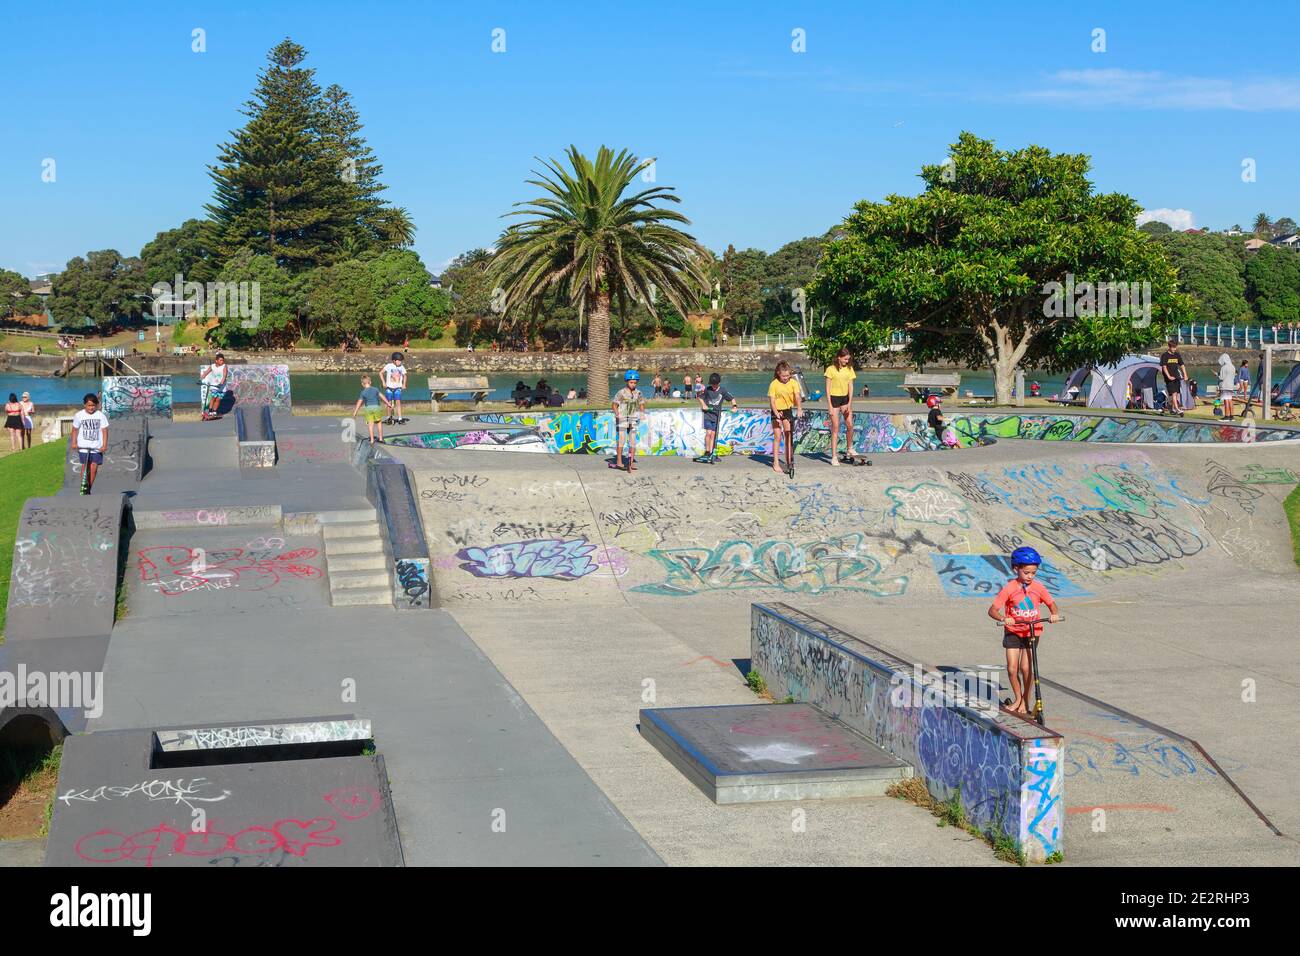 Children on scooters and skateboards playing at a skate park. Raglan, New Zealand Stock Photo